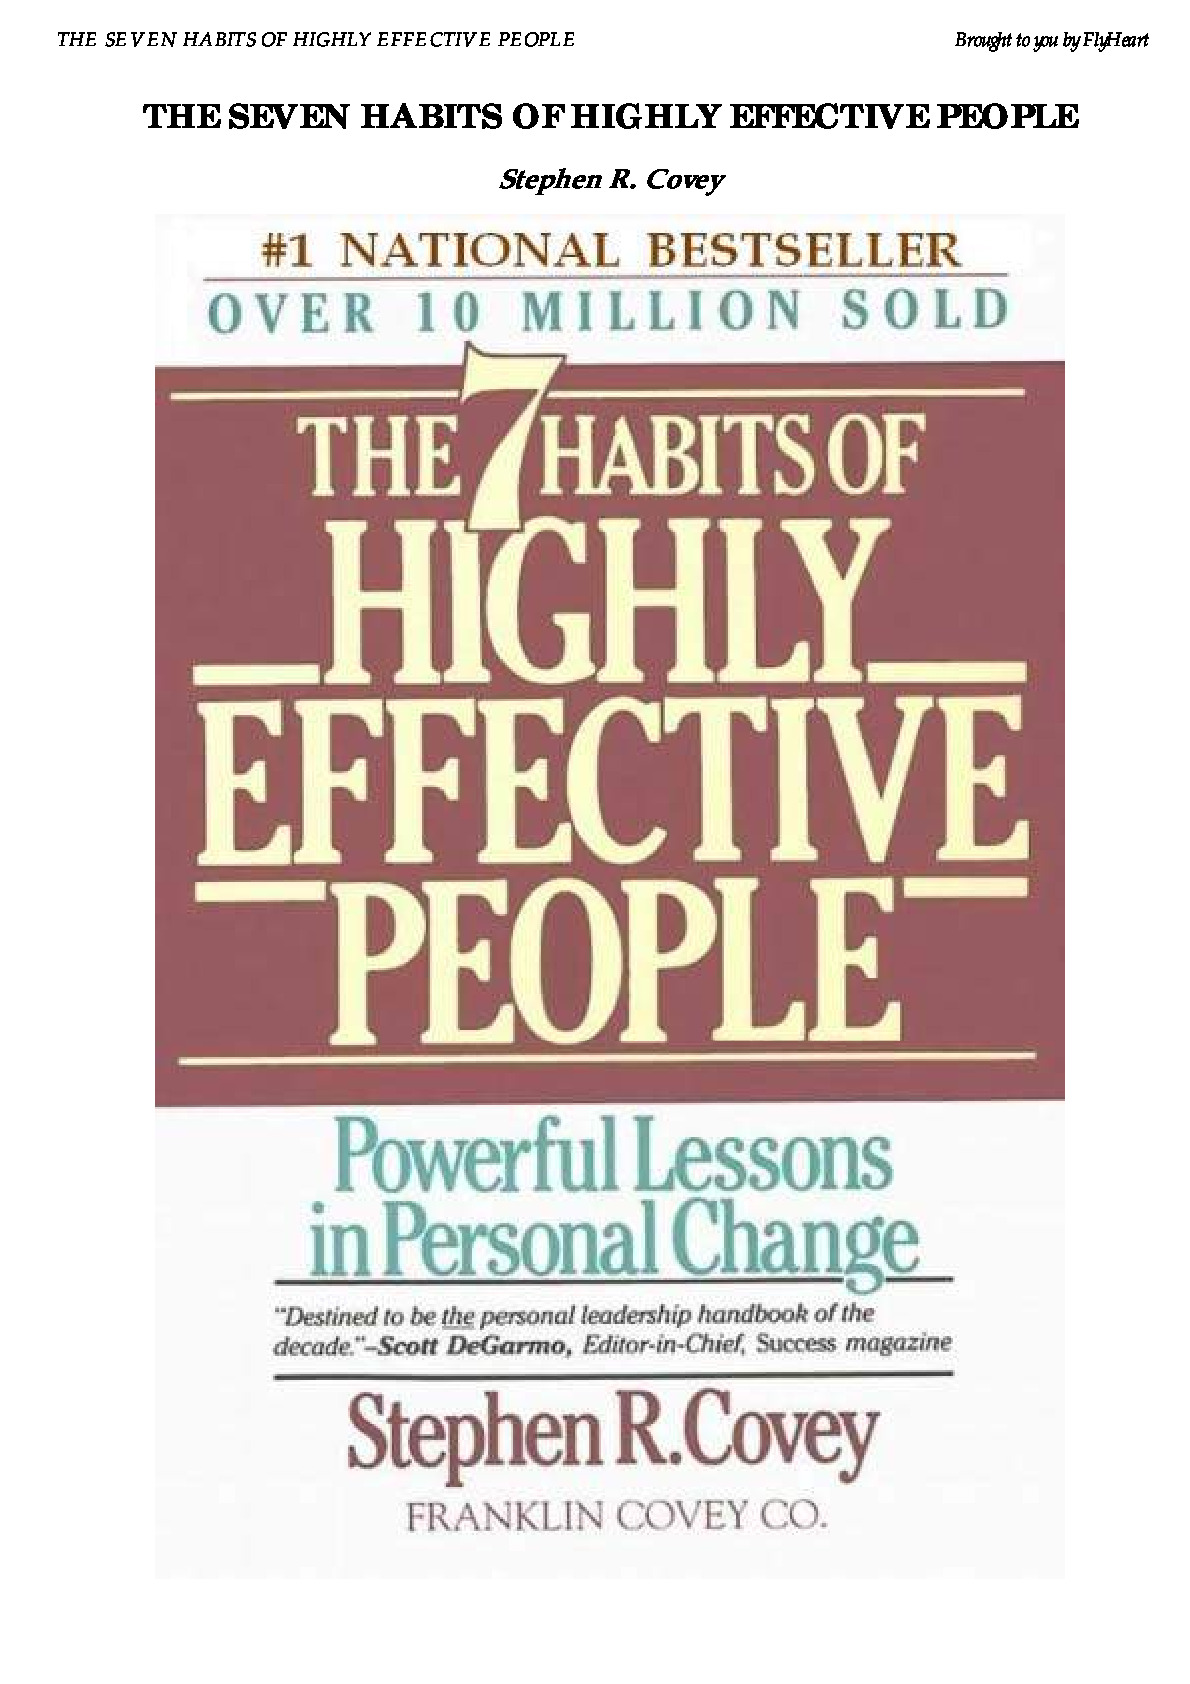 covey_stephen_-_the_seven_habits_of_highly_effective_people_compressed (1)